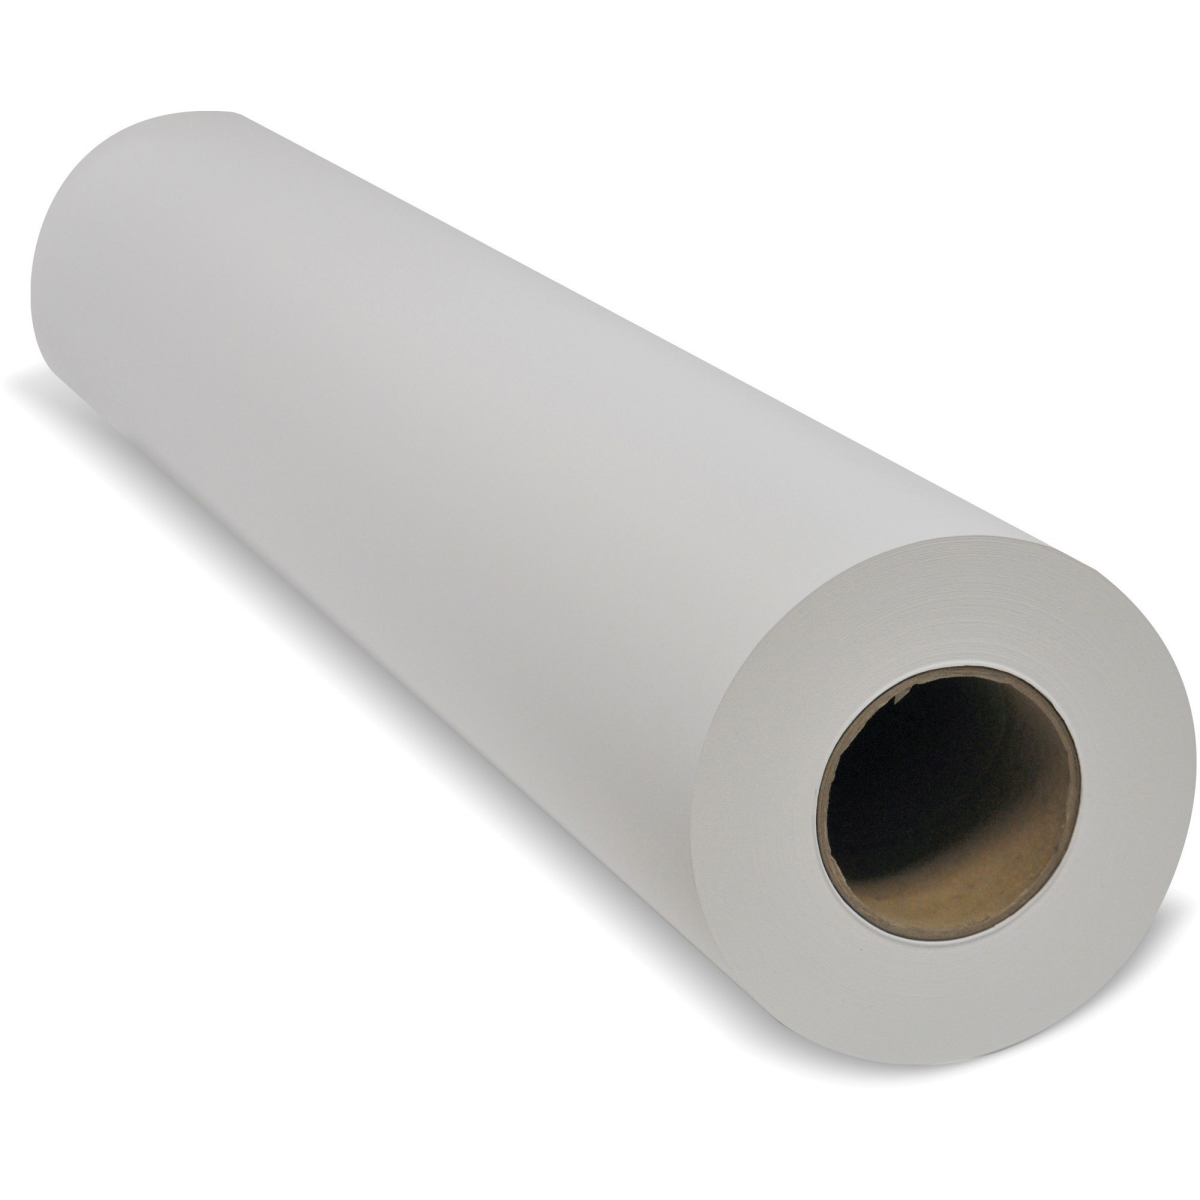 Iconex Icx90750202 Uncoated Wide Format Copy & Multipurpose Paper Roll, White